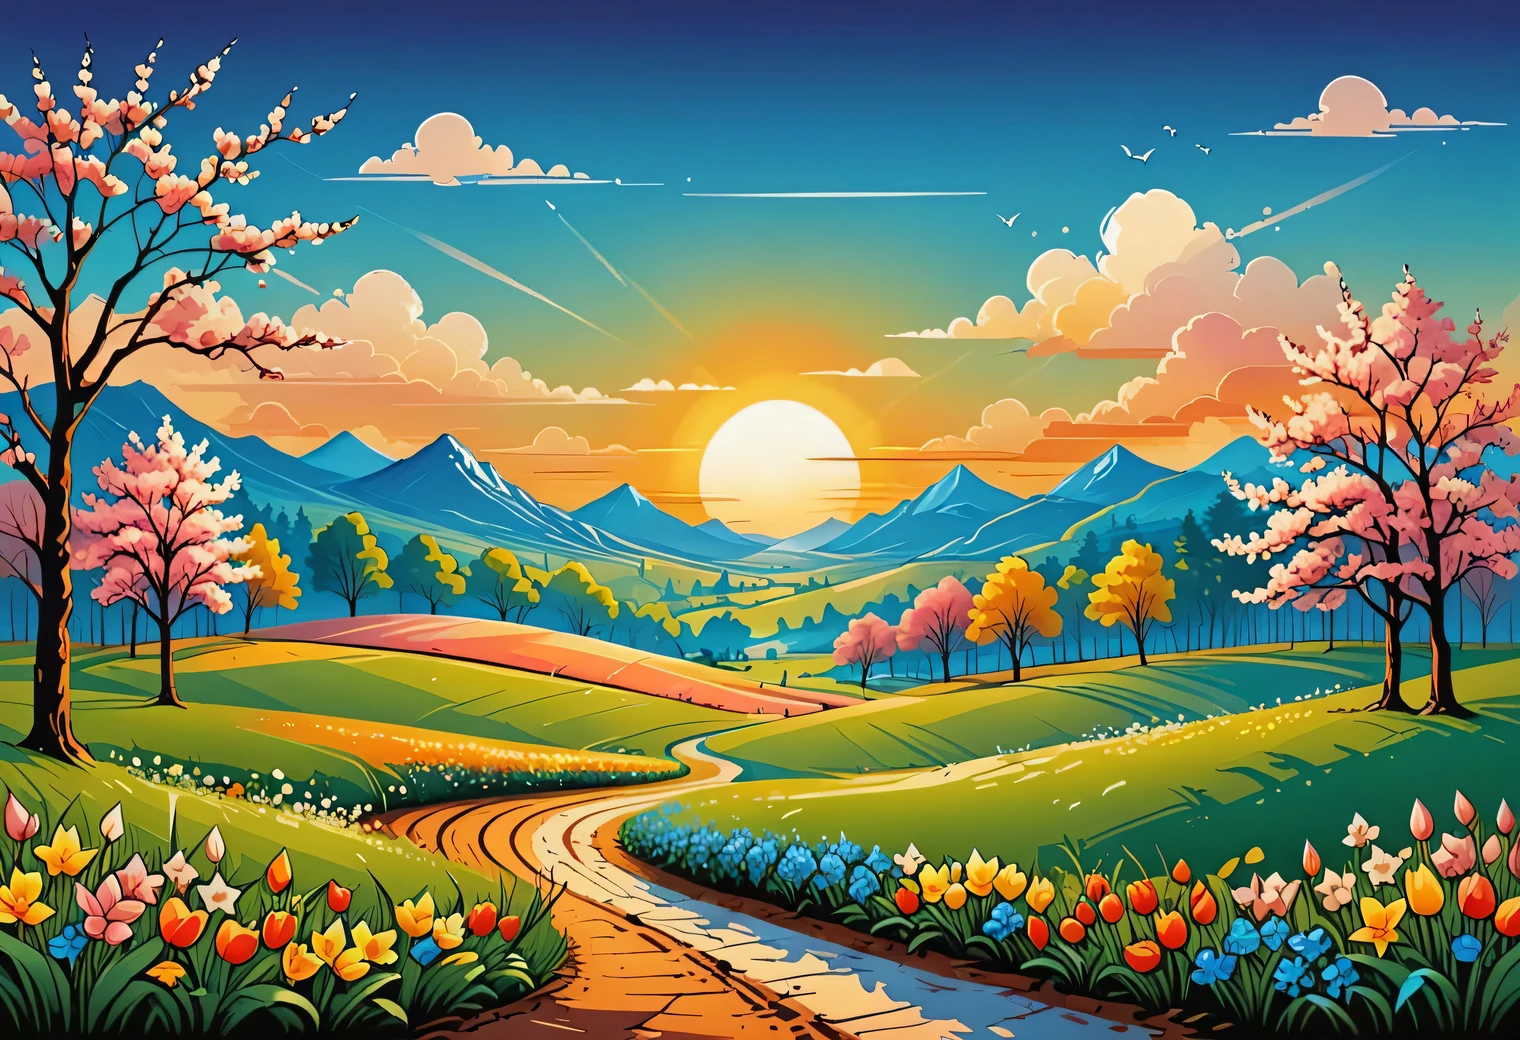 Aesthetics of vector art, spring in vector graphics, warm, sunny, joyful, nature wakes up, vector art, high definition, clear contours, gradients